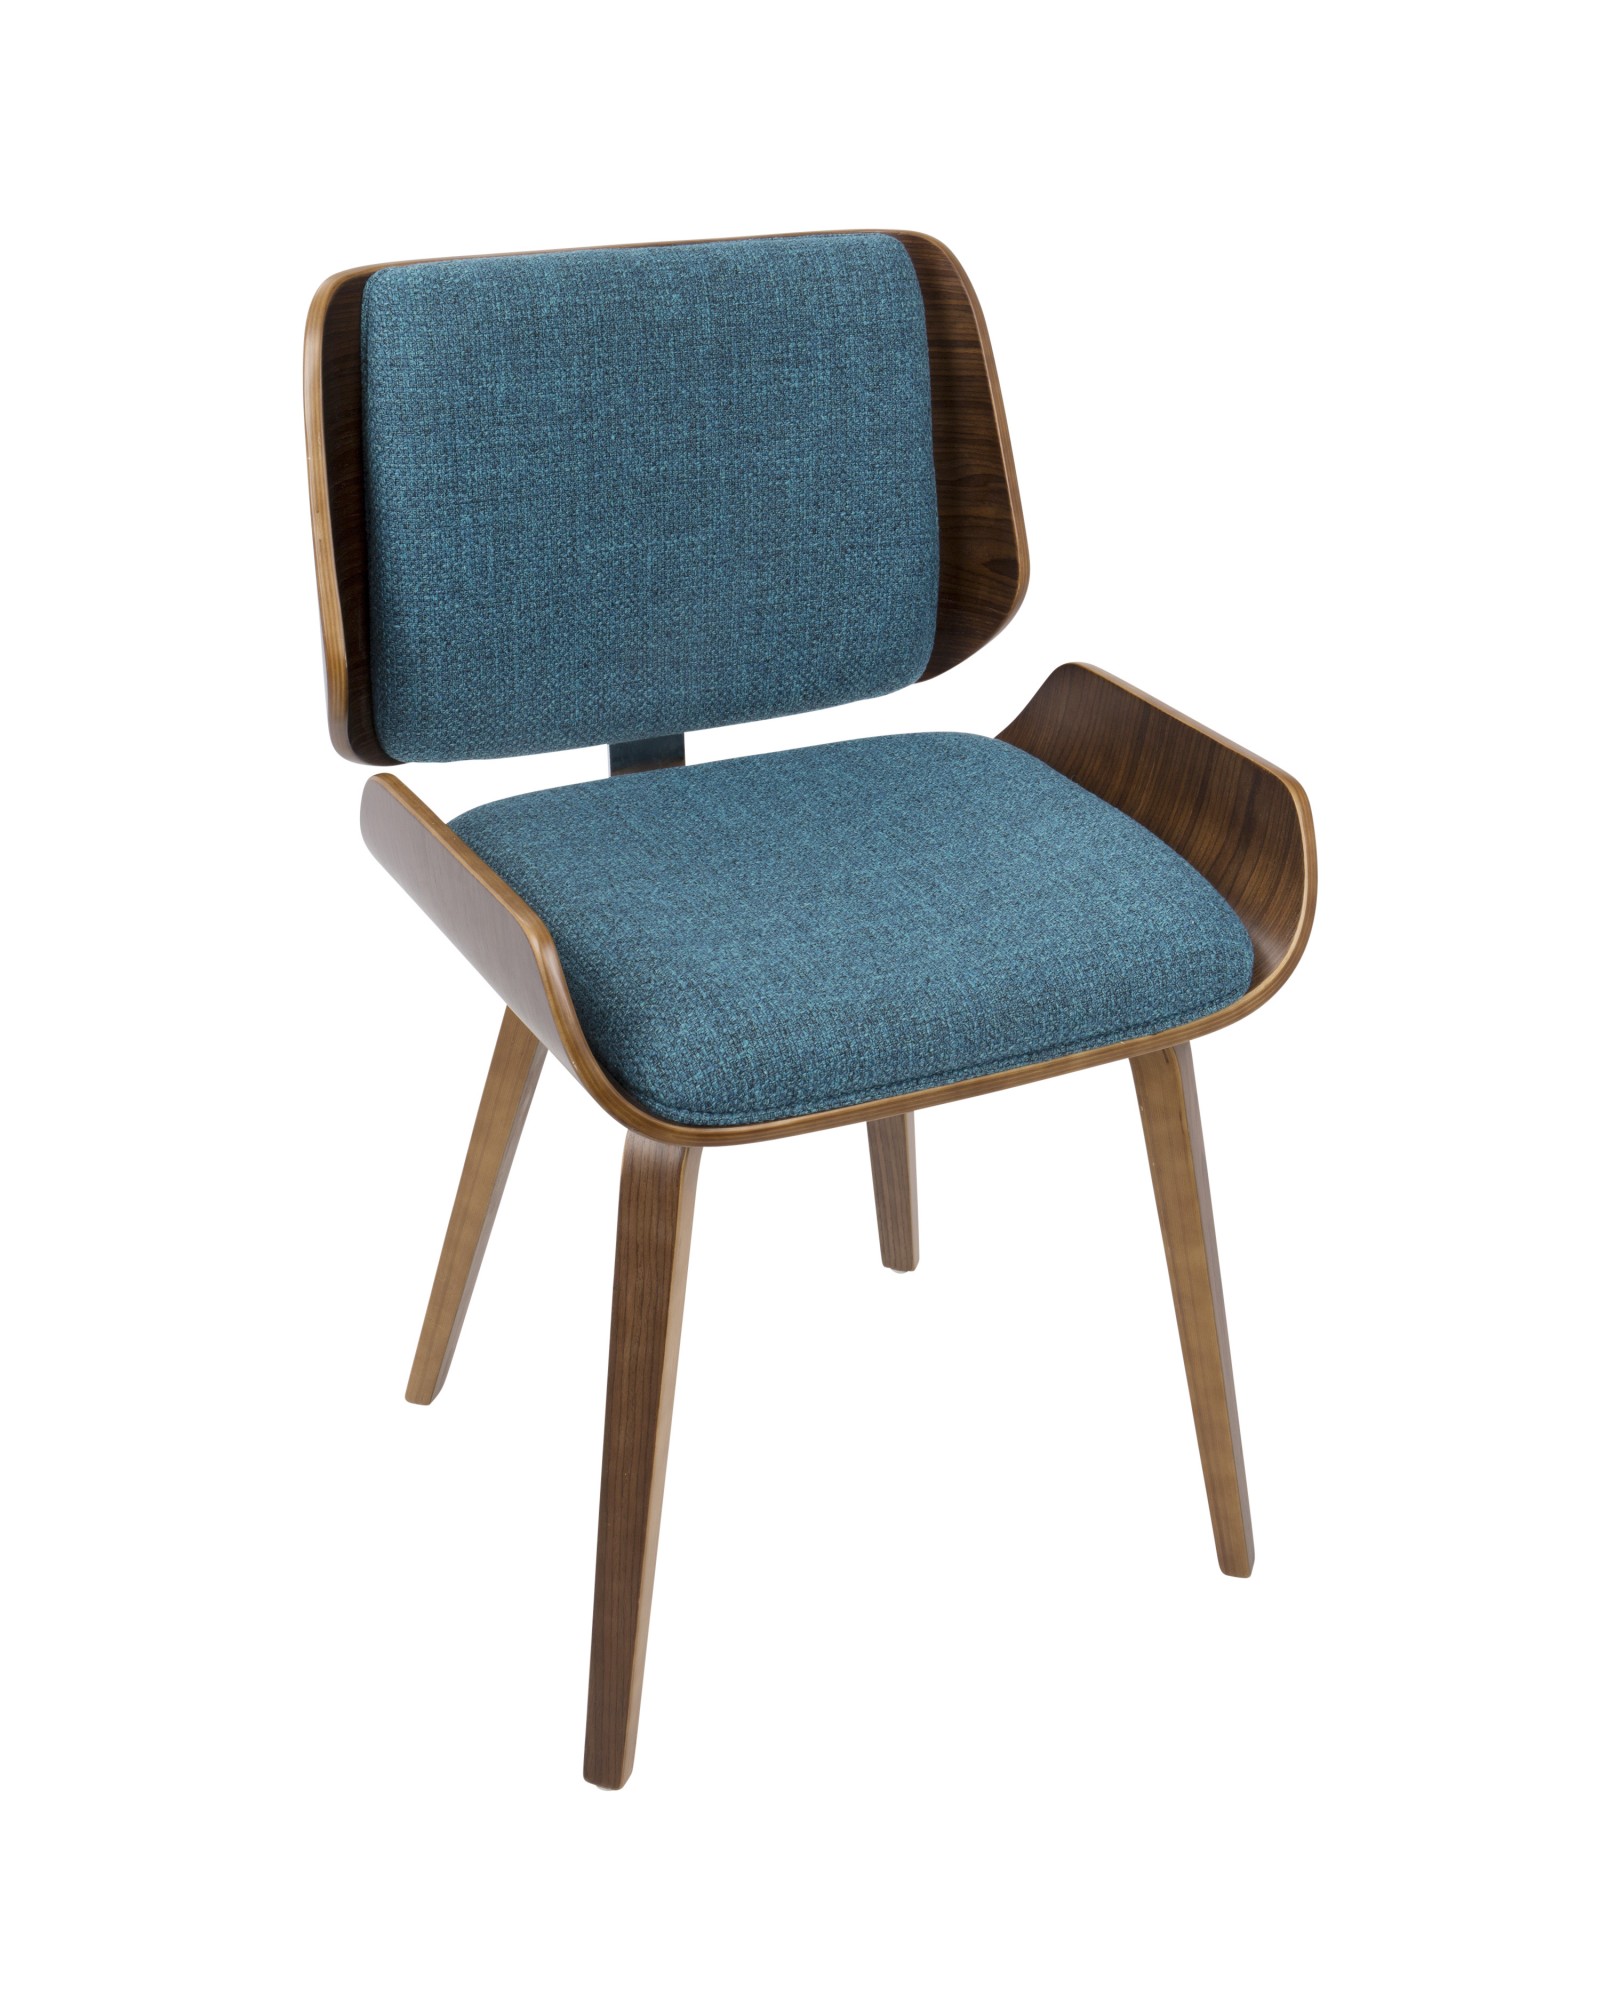 Santi Mid-Century Modern Dining/Accent Chair in Walnut with Turquoise Fabric - Set of 2